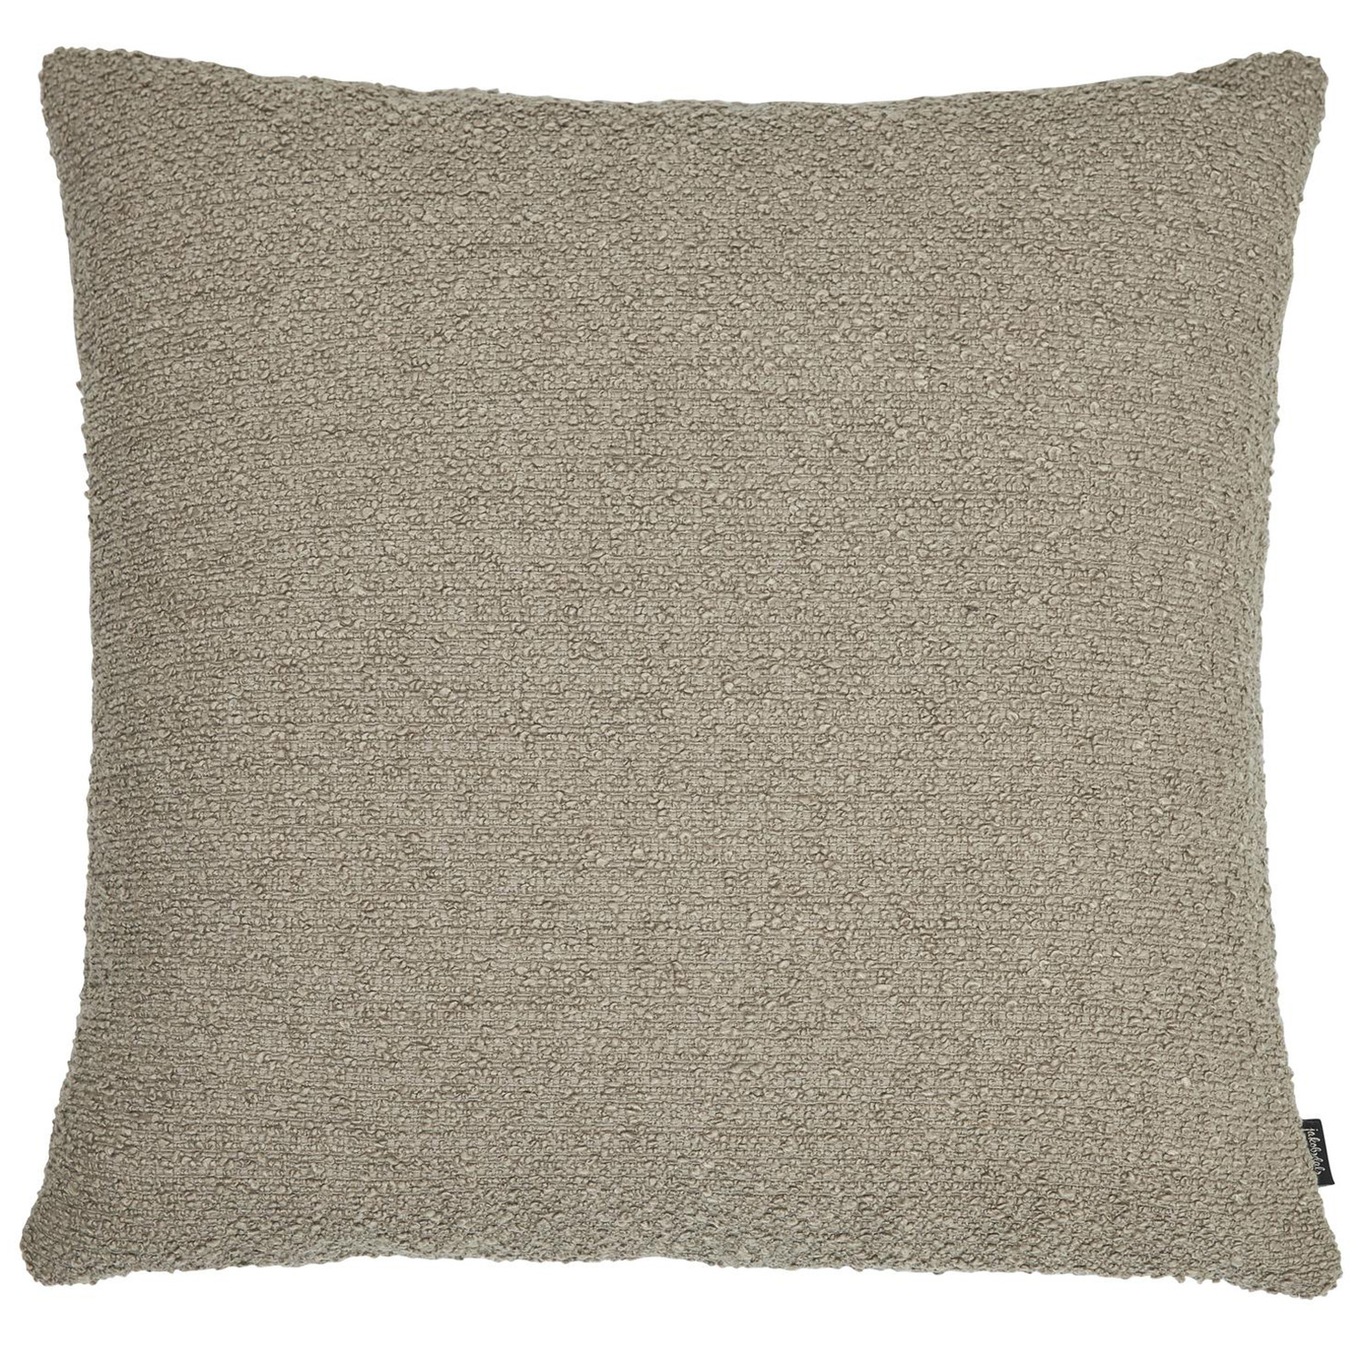 Boucle moment Kuddfodral 60X60 cm, Greige